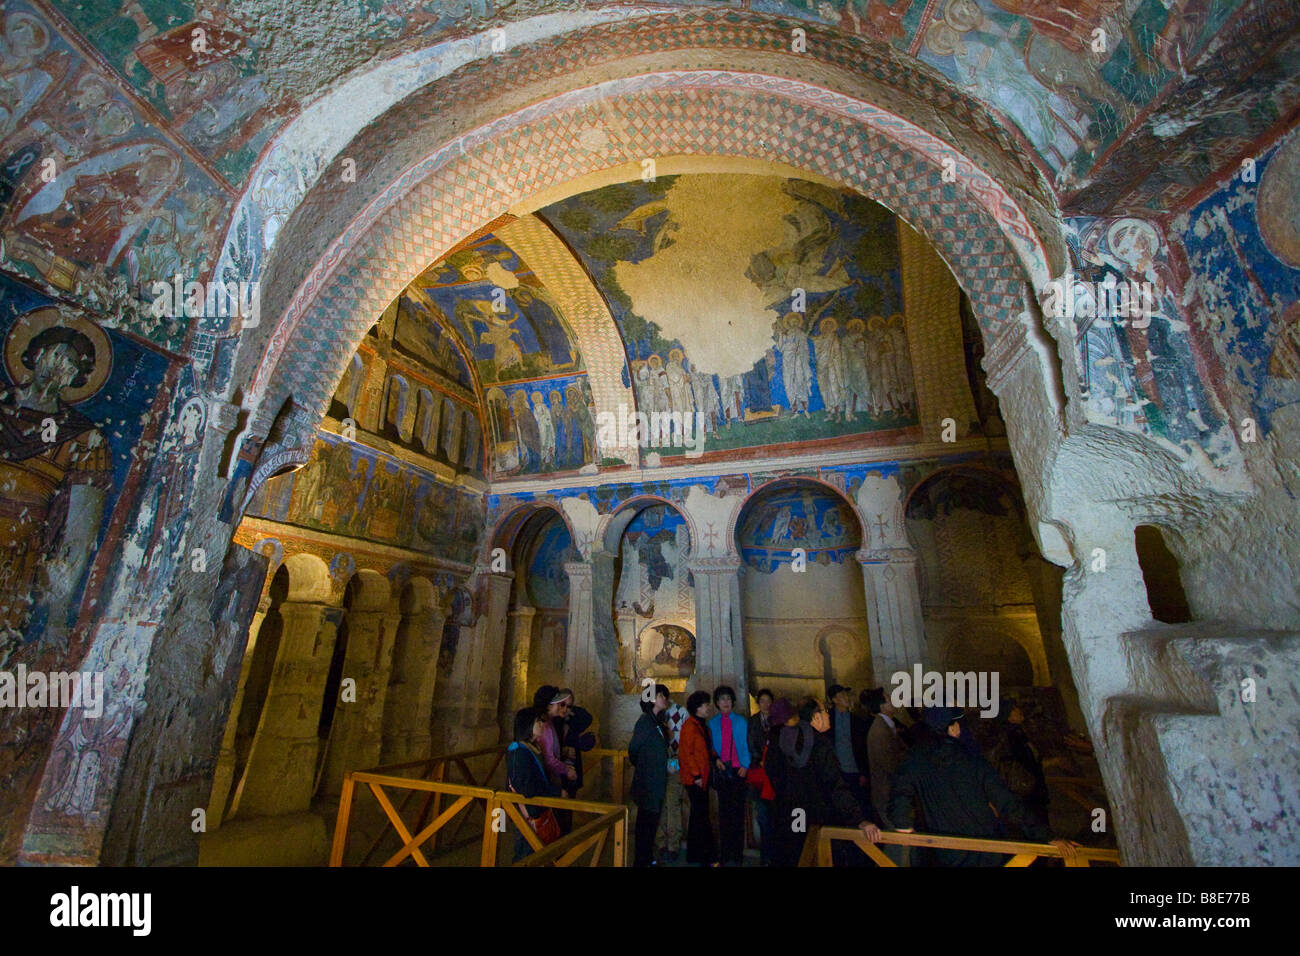 South Korean tour group looking at Frescos in the Buckle Church or Tokali Kilise in Goreme Open Air Museum in Cappadocia, Turkey Stock Photo